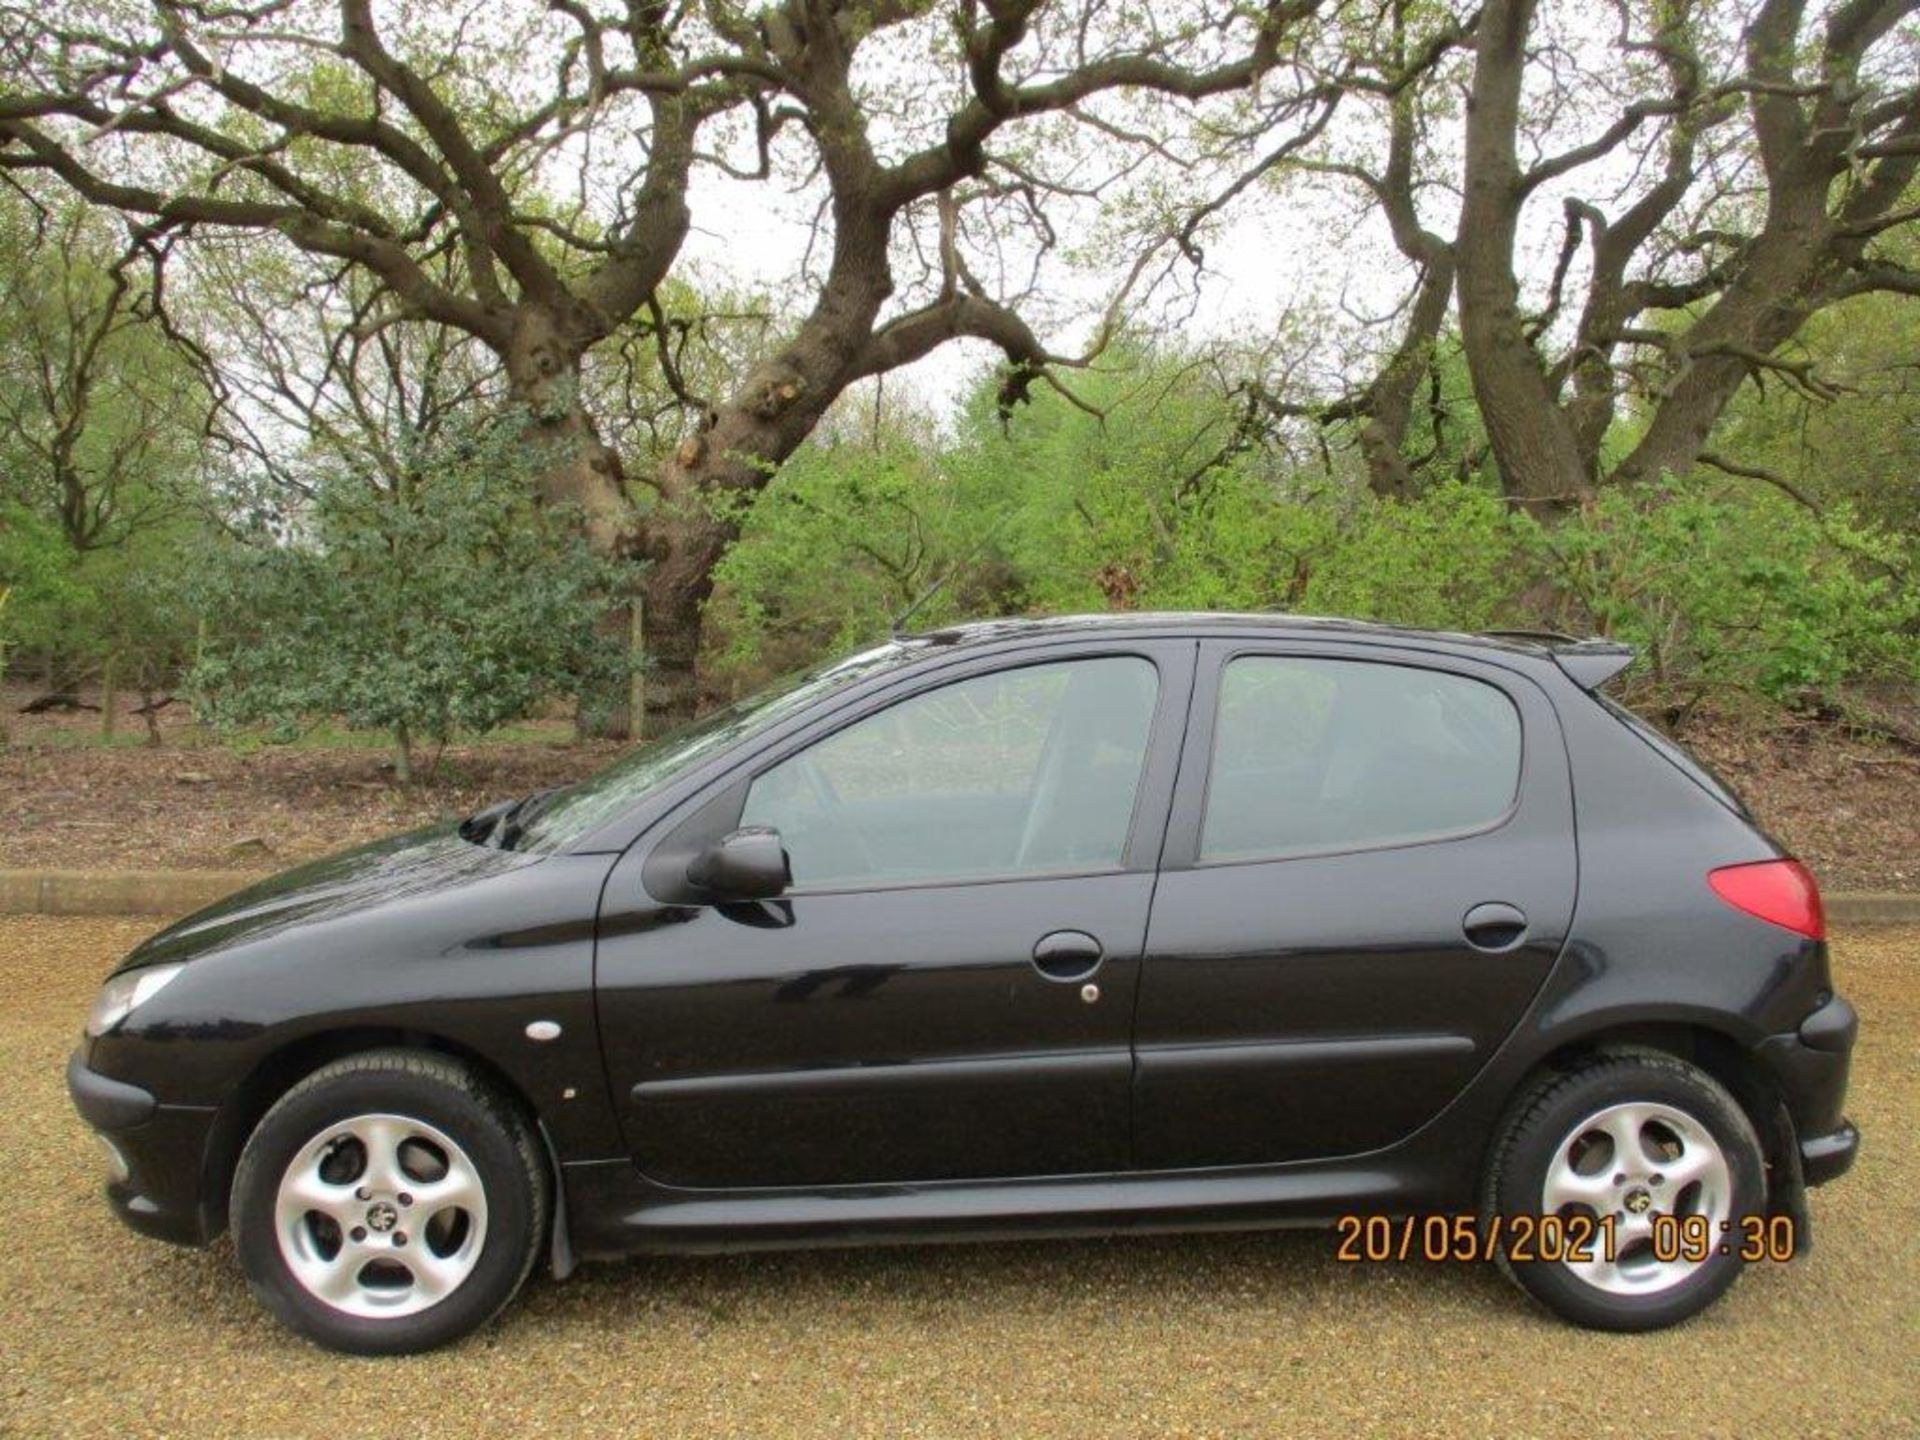 04 04 Peugeot 206 S - Image 3 of 20